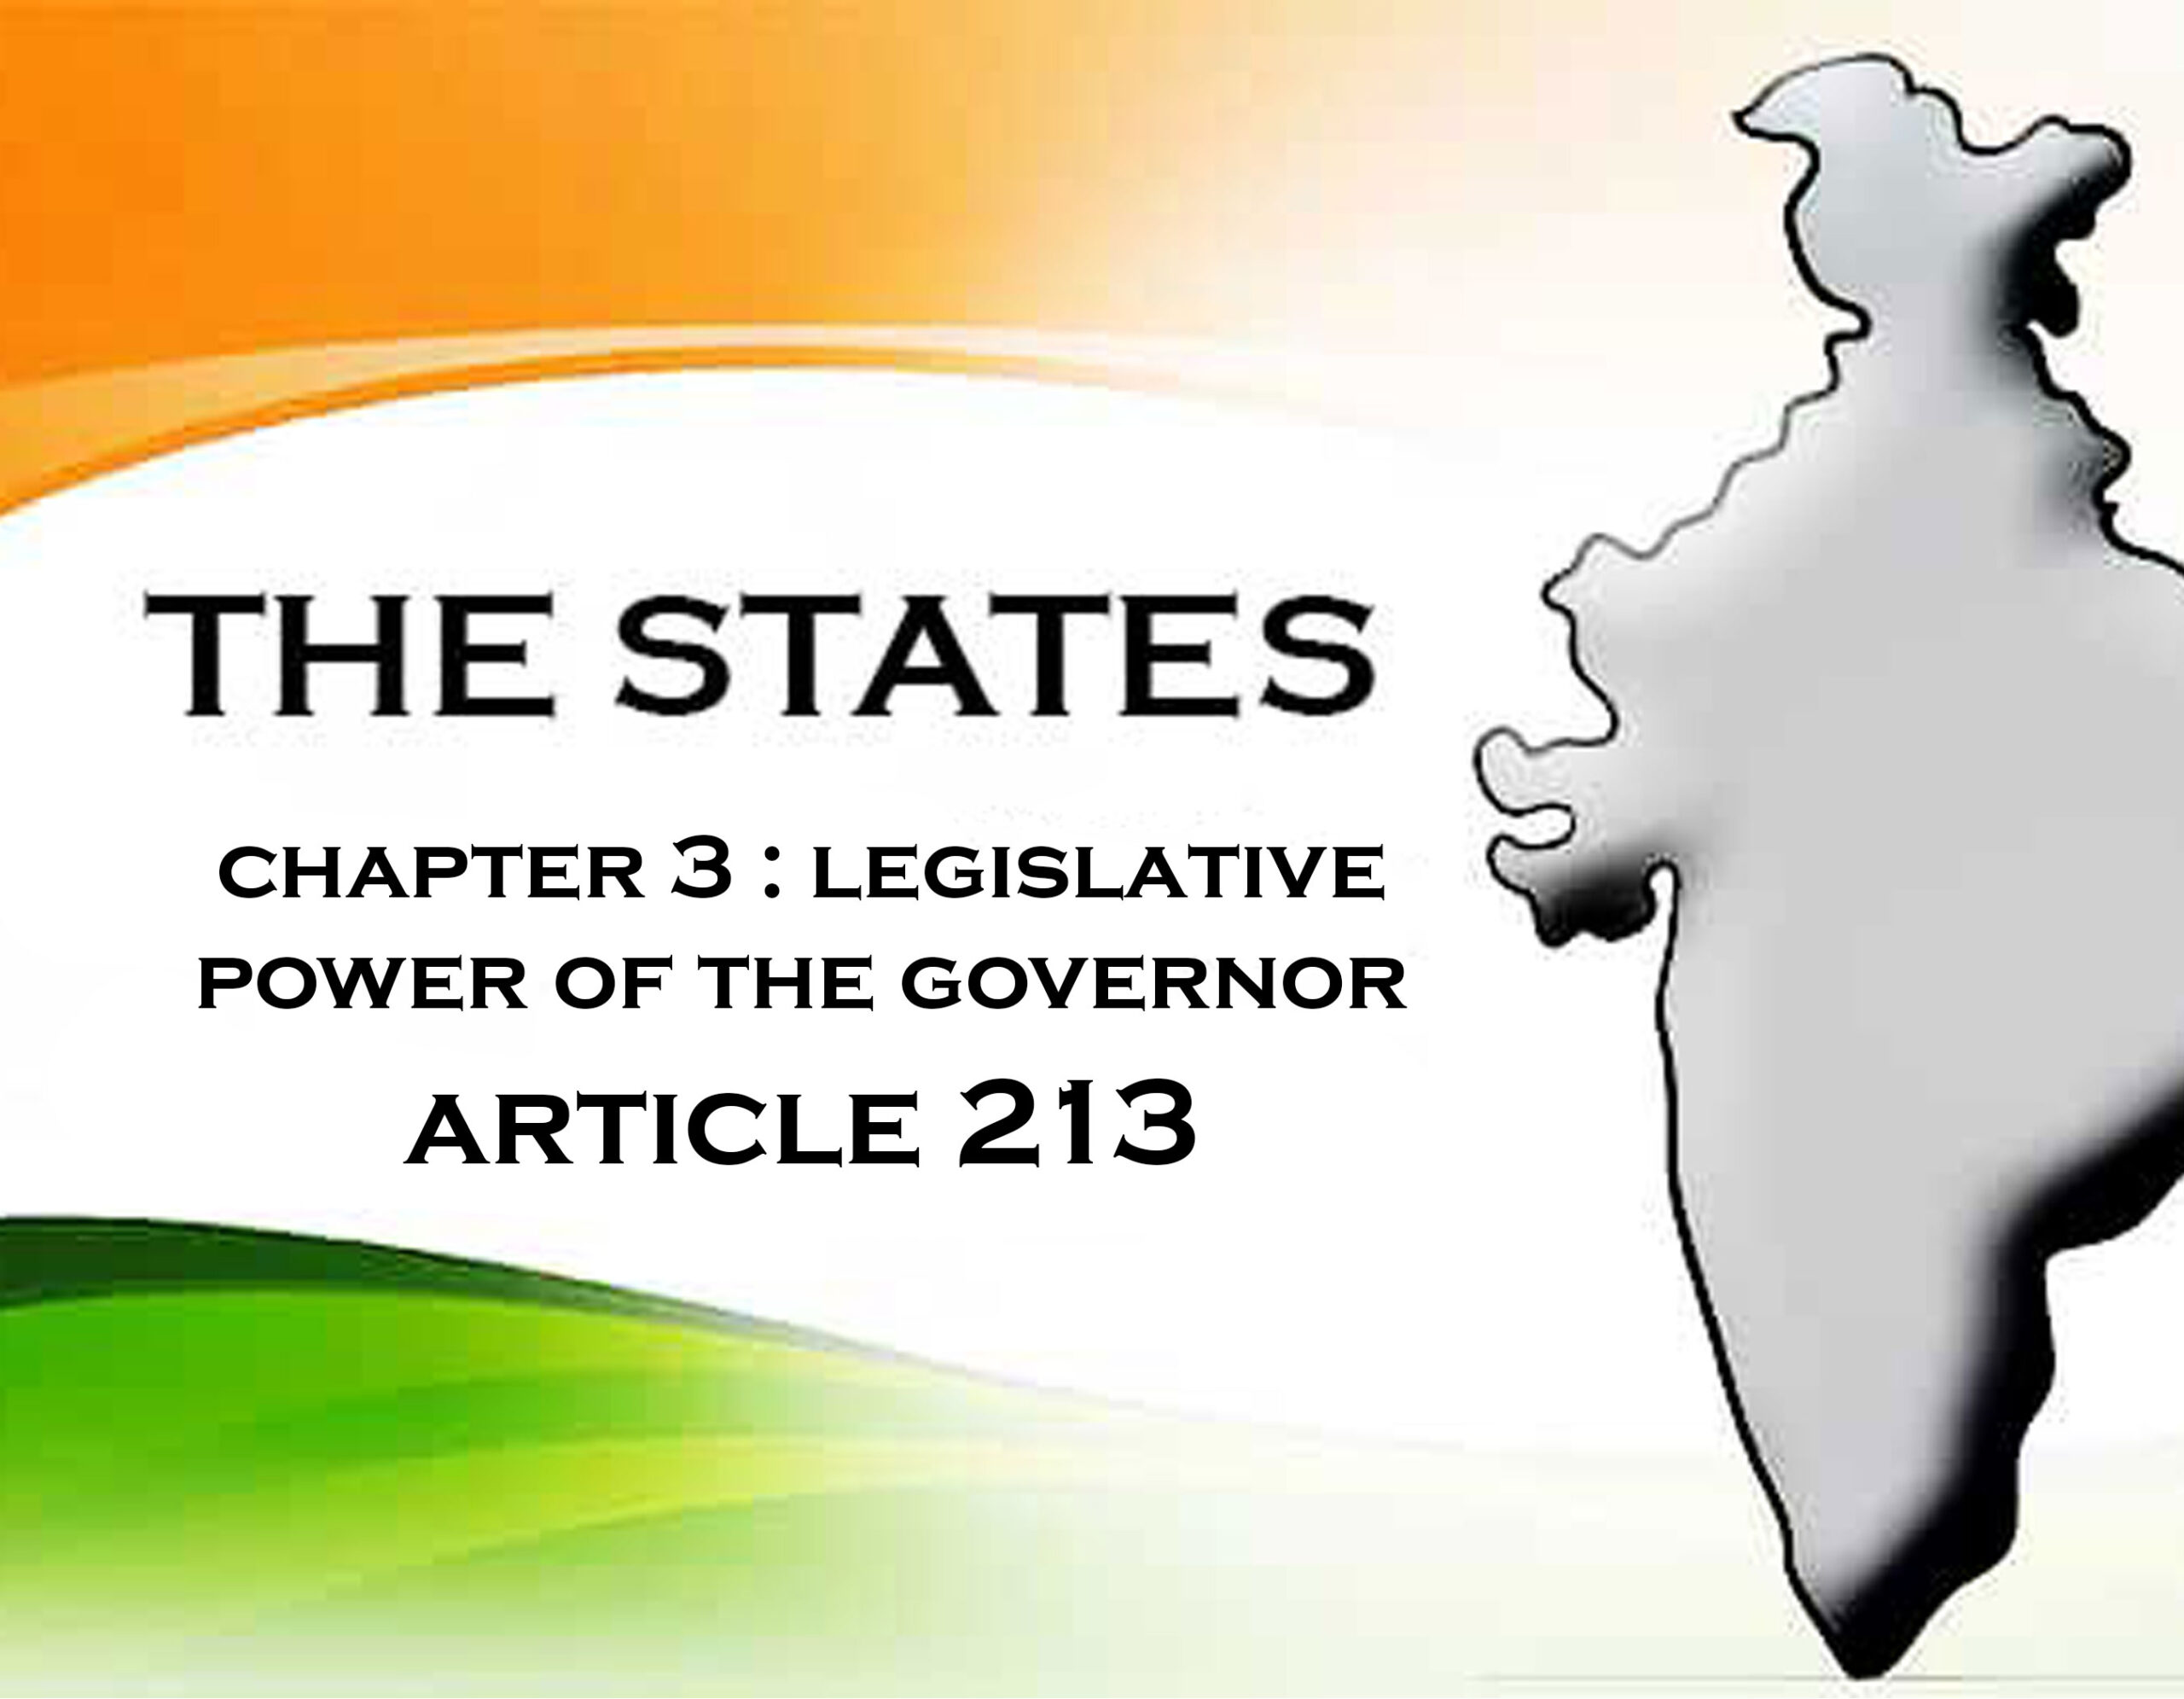 Chapter 3 : Legislative Power of the Governor (Article 213)